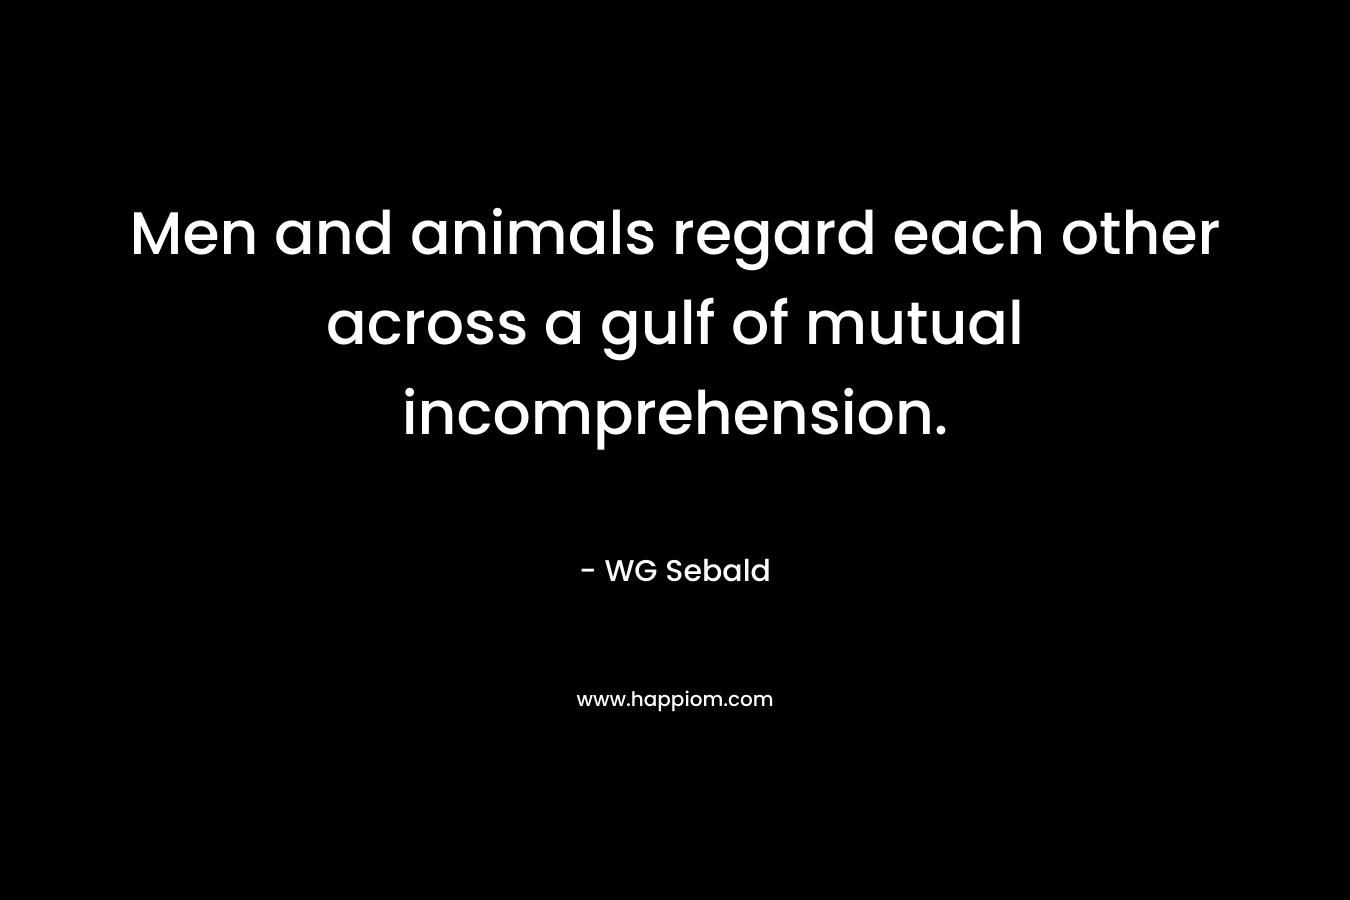 Men and animals regard each other across a gulf of mutual incomprehension. – WG Sebald